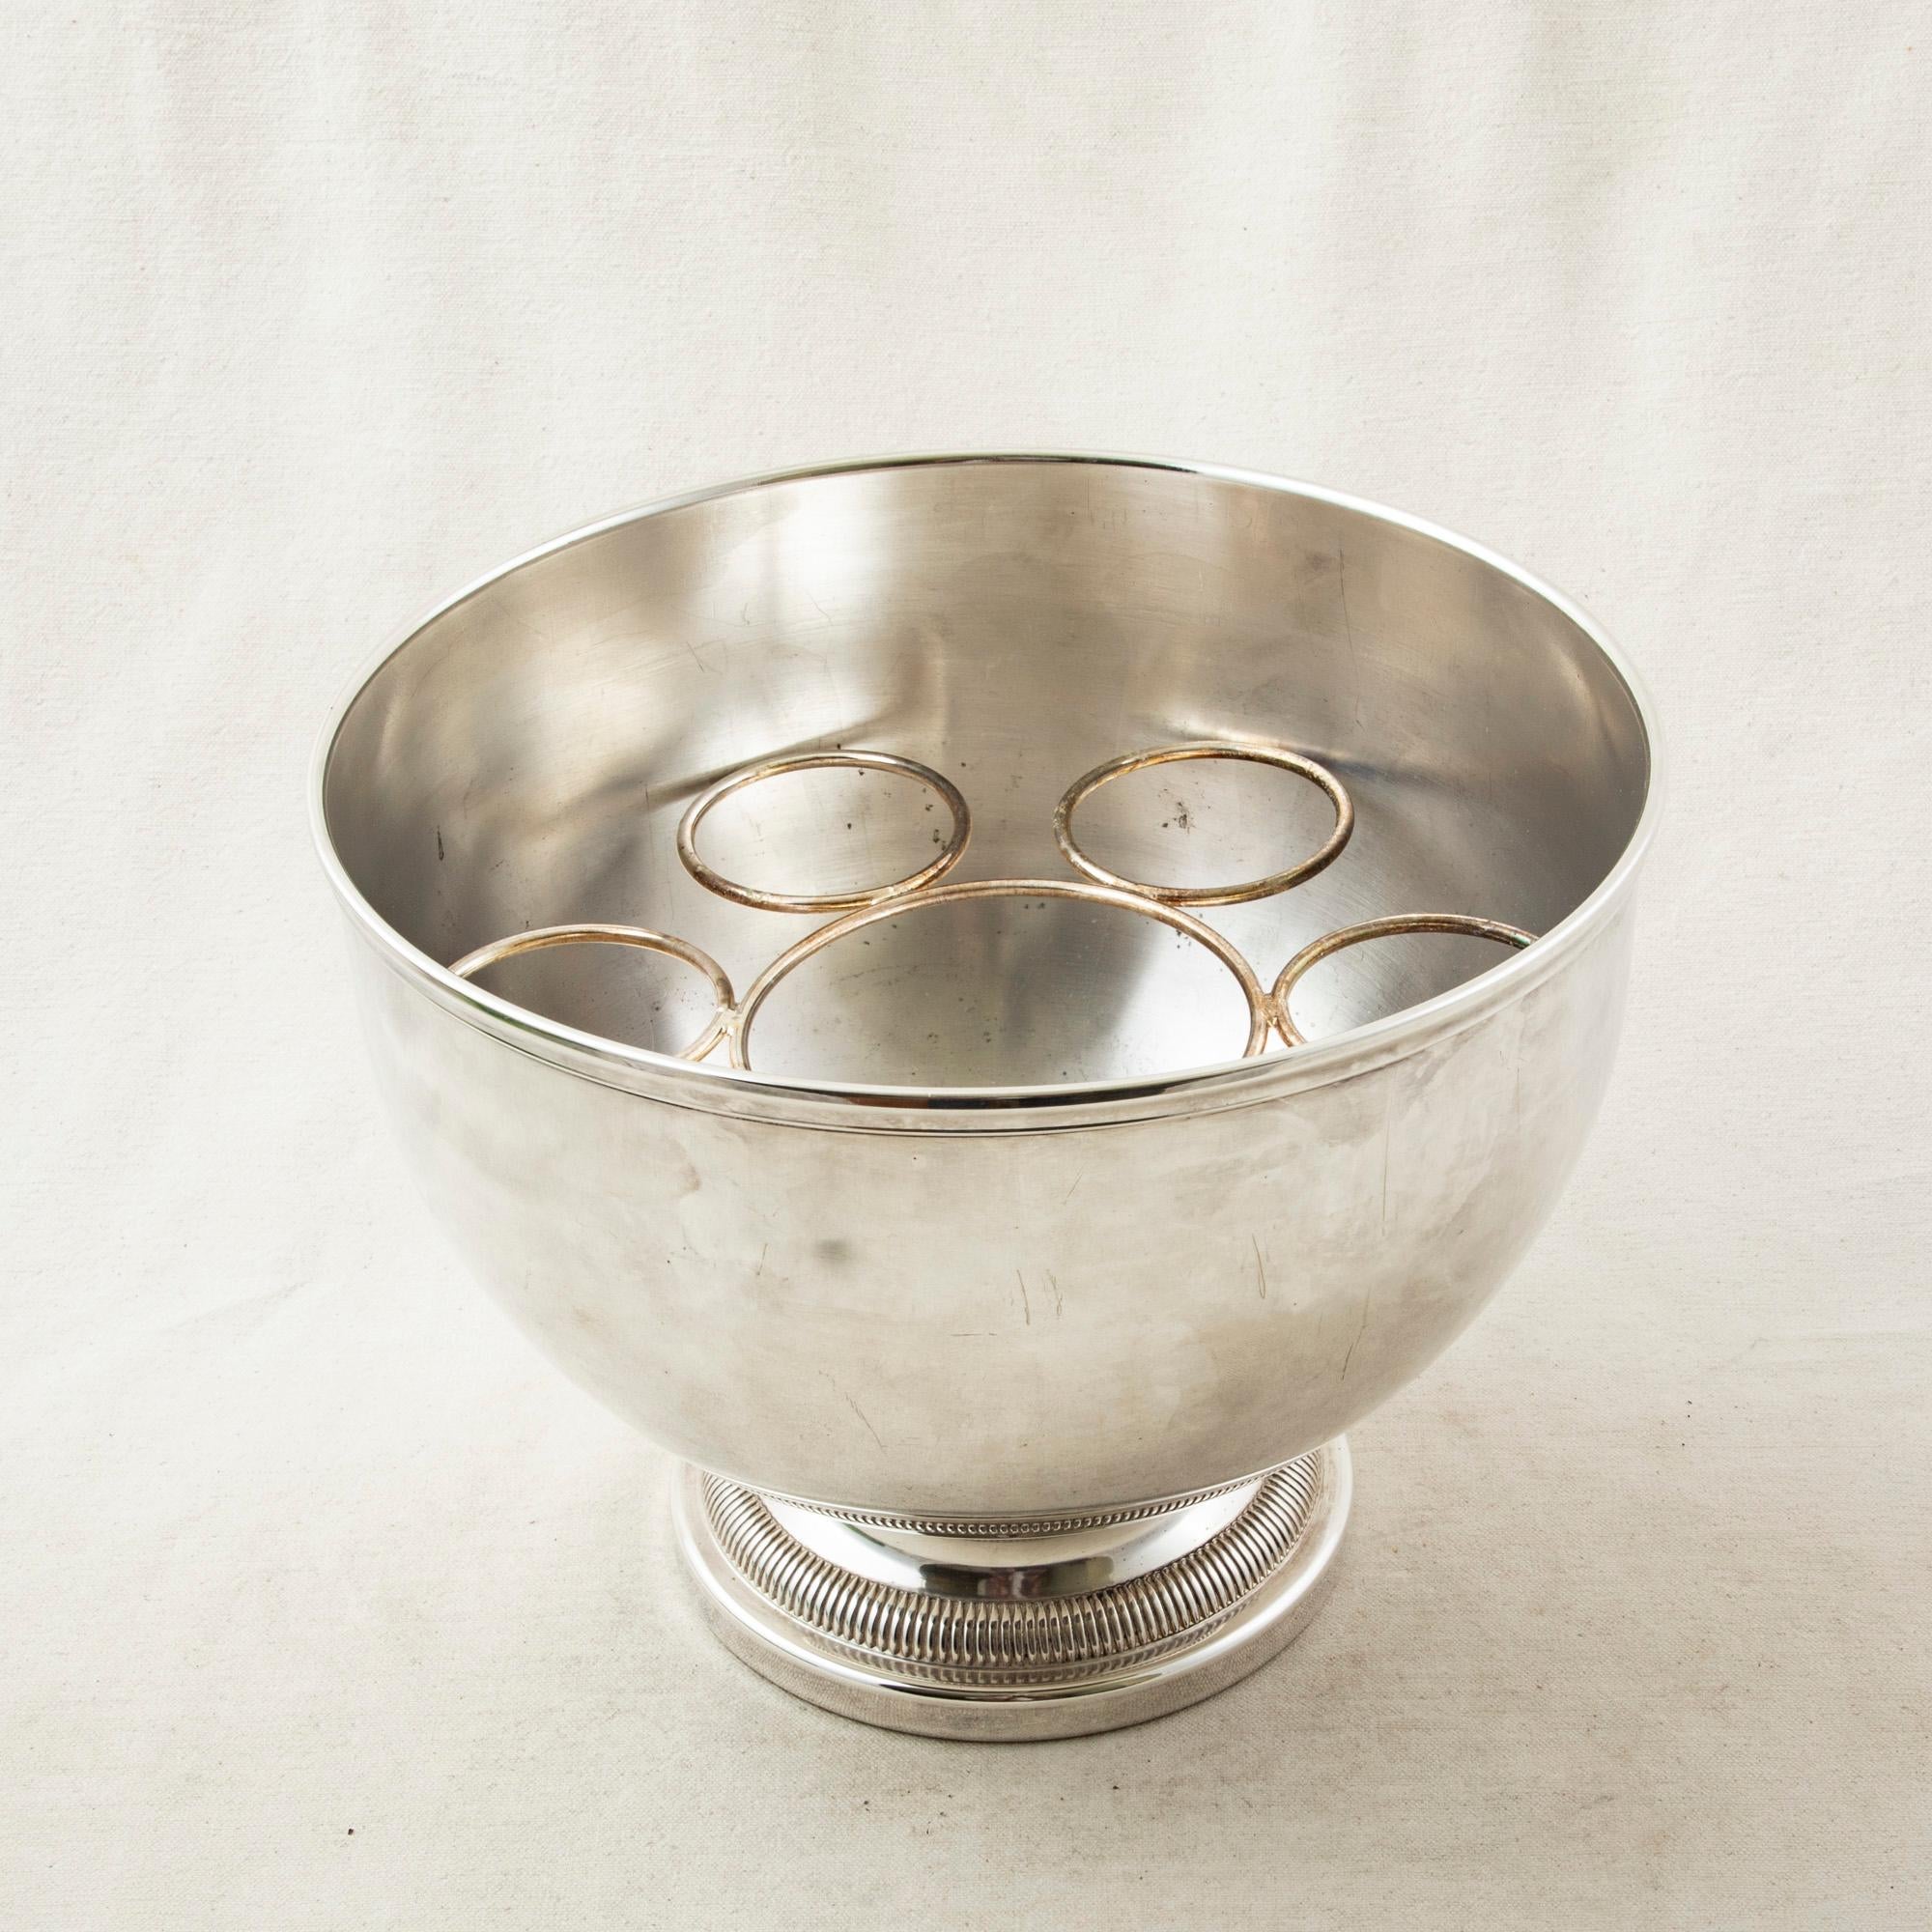 This mid-20th century French silver plate hotel champagne bucket or wine chiller features its original removable insert to hold a bottle and six champagne flutes. The bowl rests on a footed base. An ideal ice bucket for a dry bar, circa 1950.